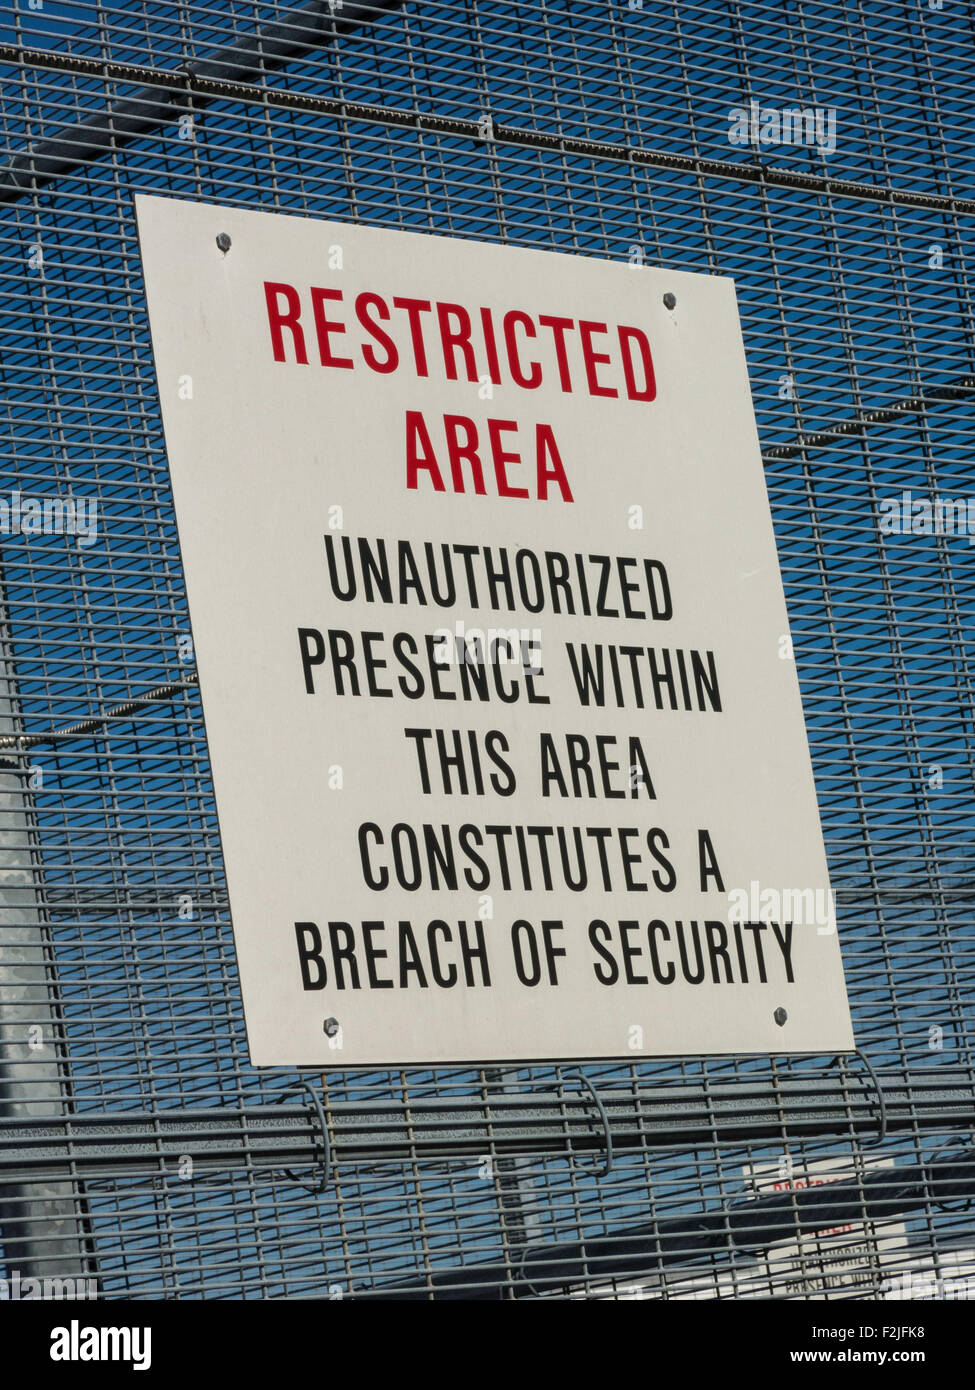 Restricted Area Sign on Metal Fence Stock Photo